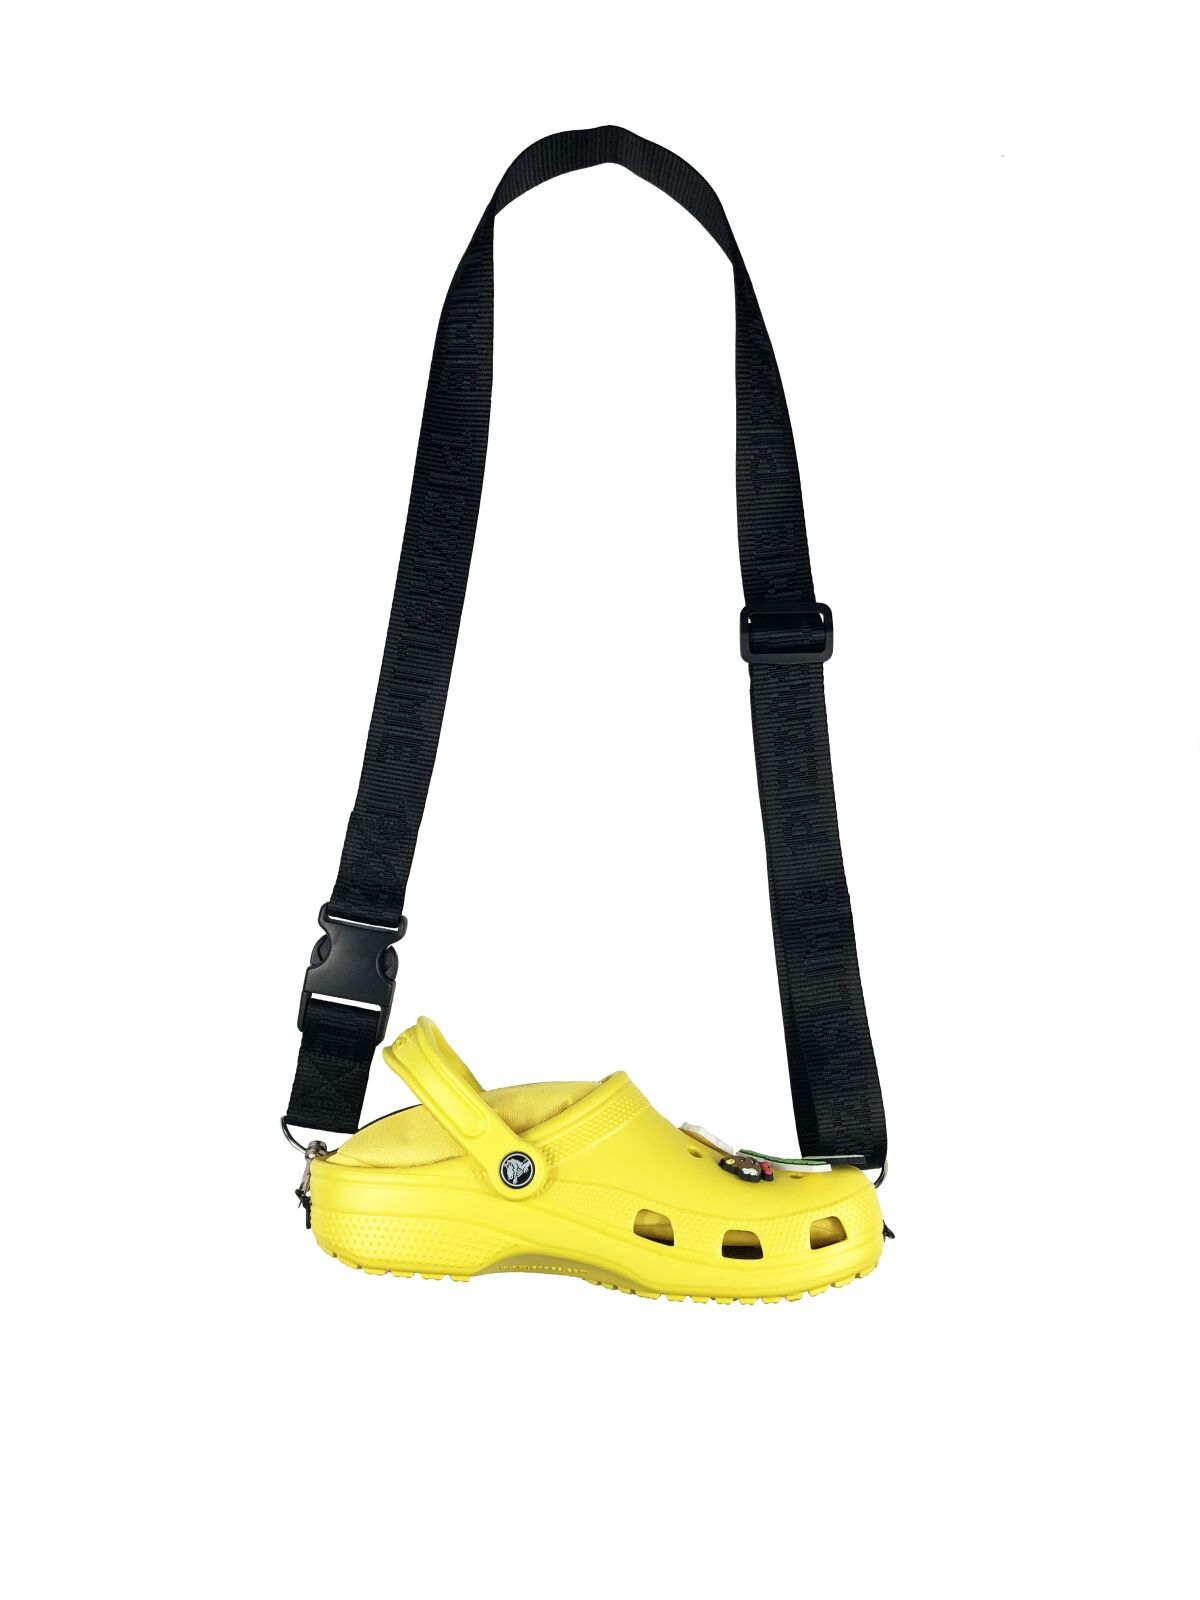 A photo of the Crocs and Pizzaslime sling bag collaboration.